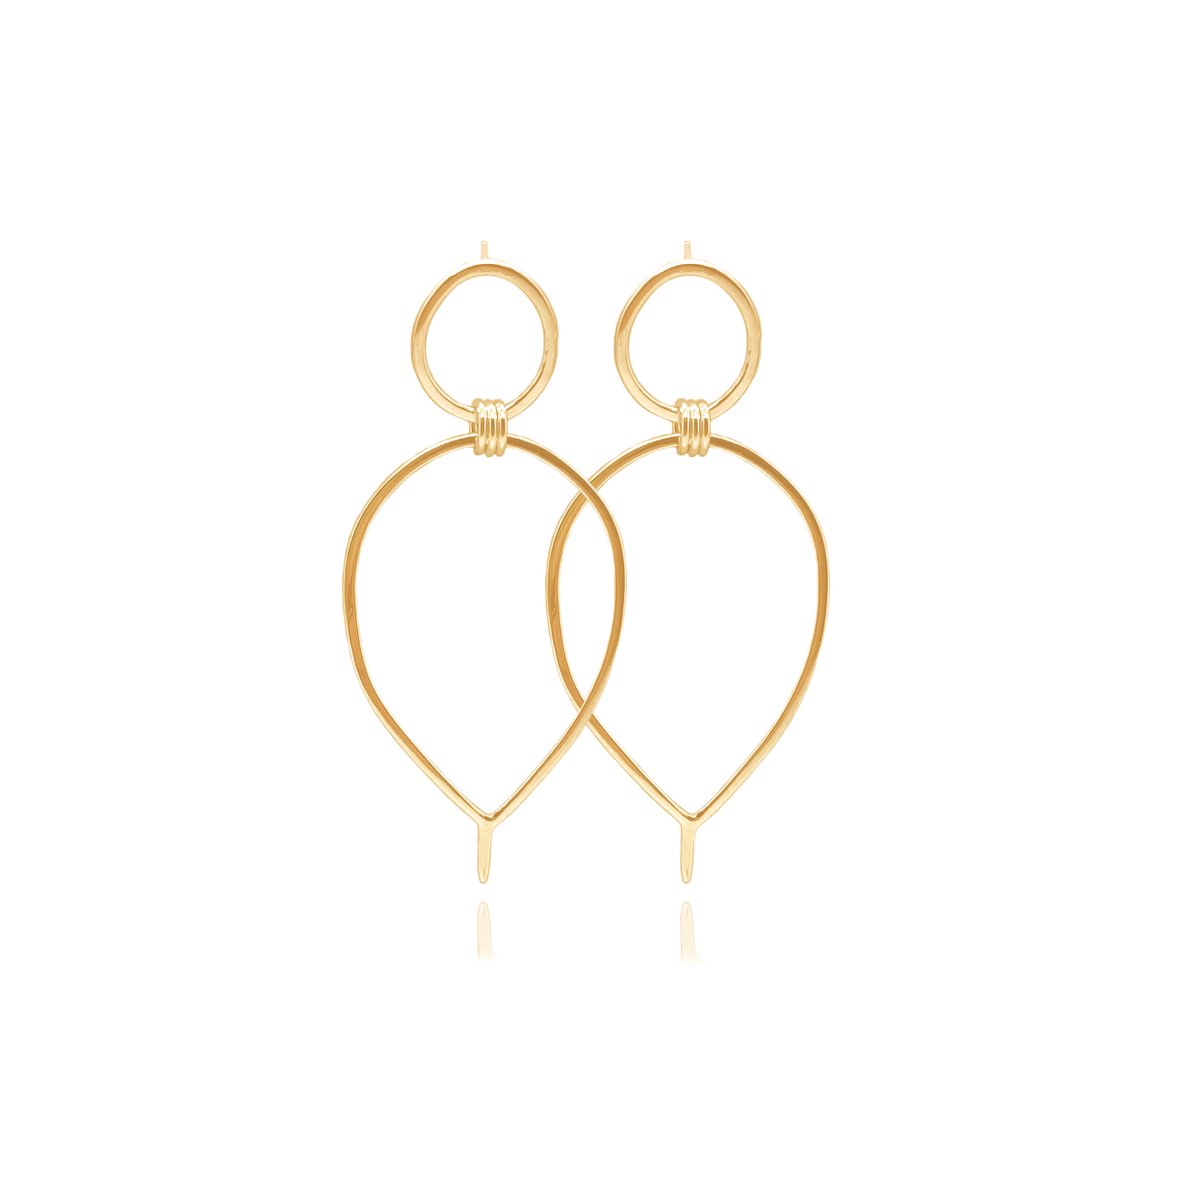 Image of Gold Lunaria earrings